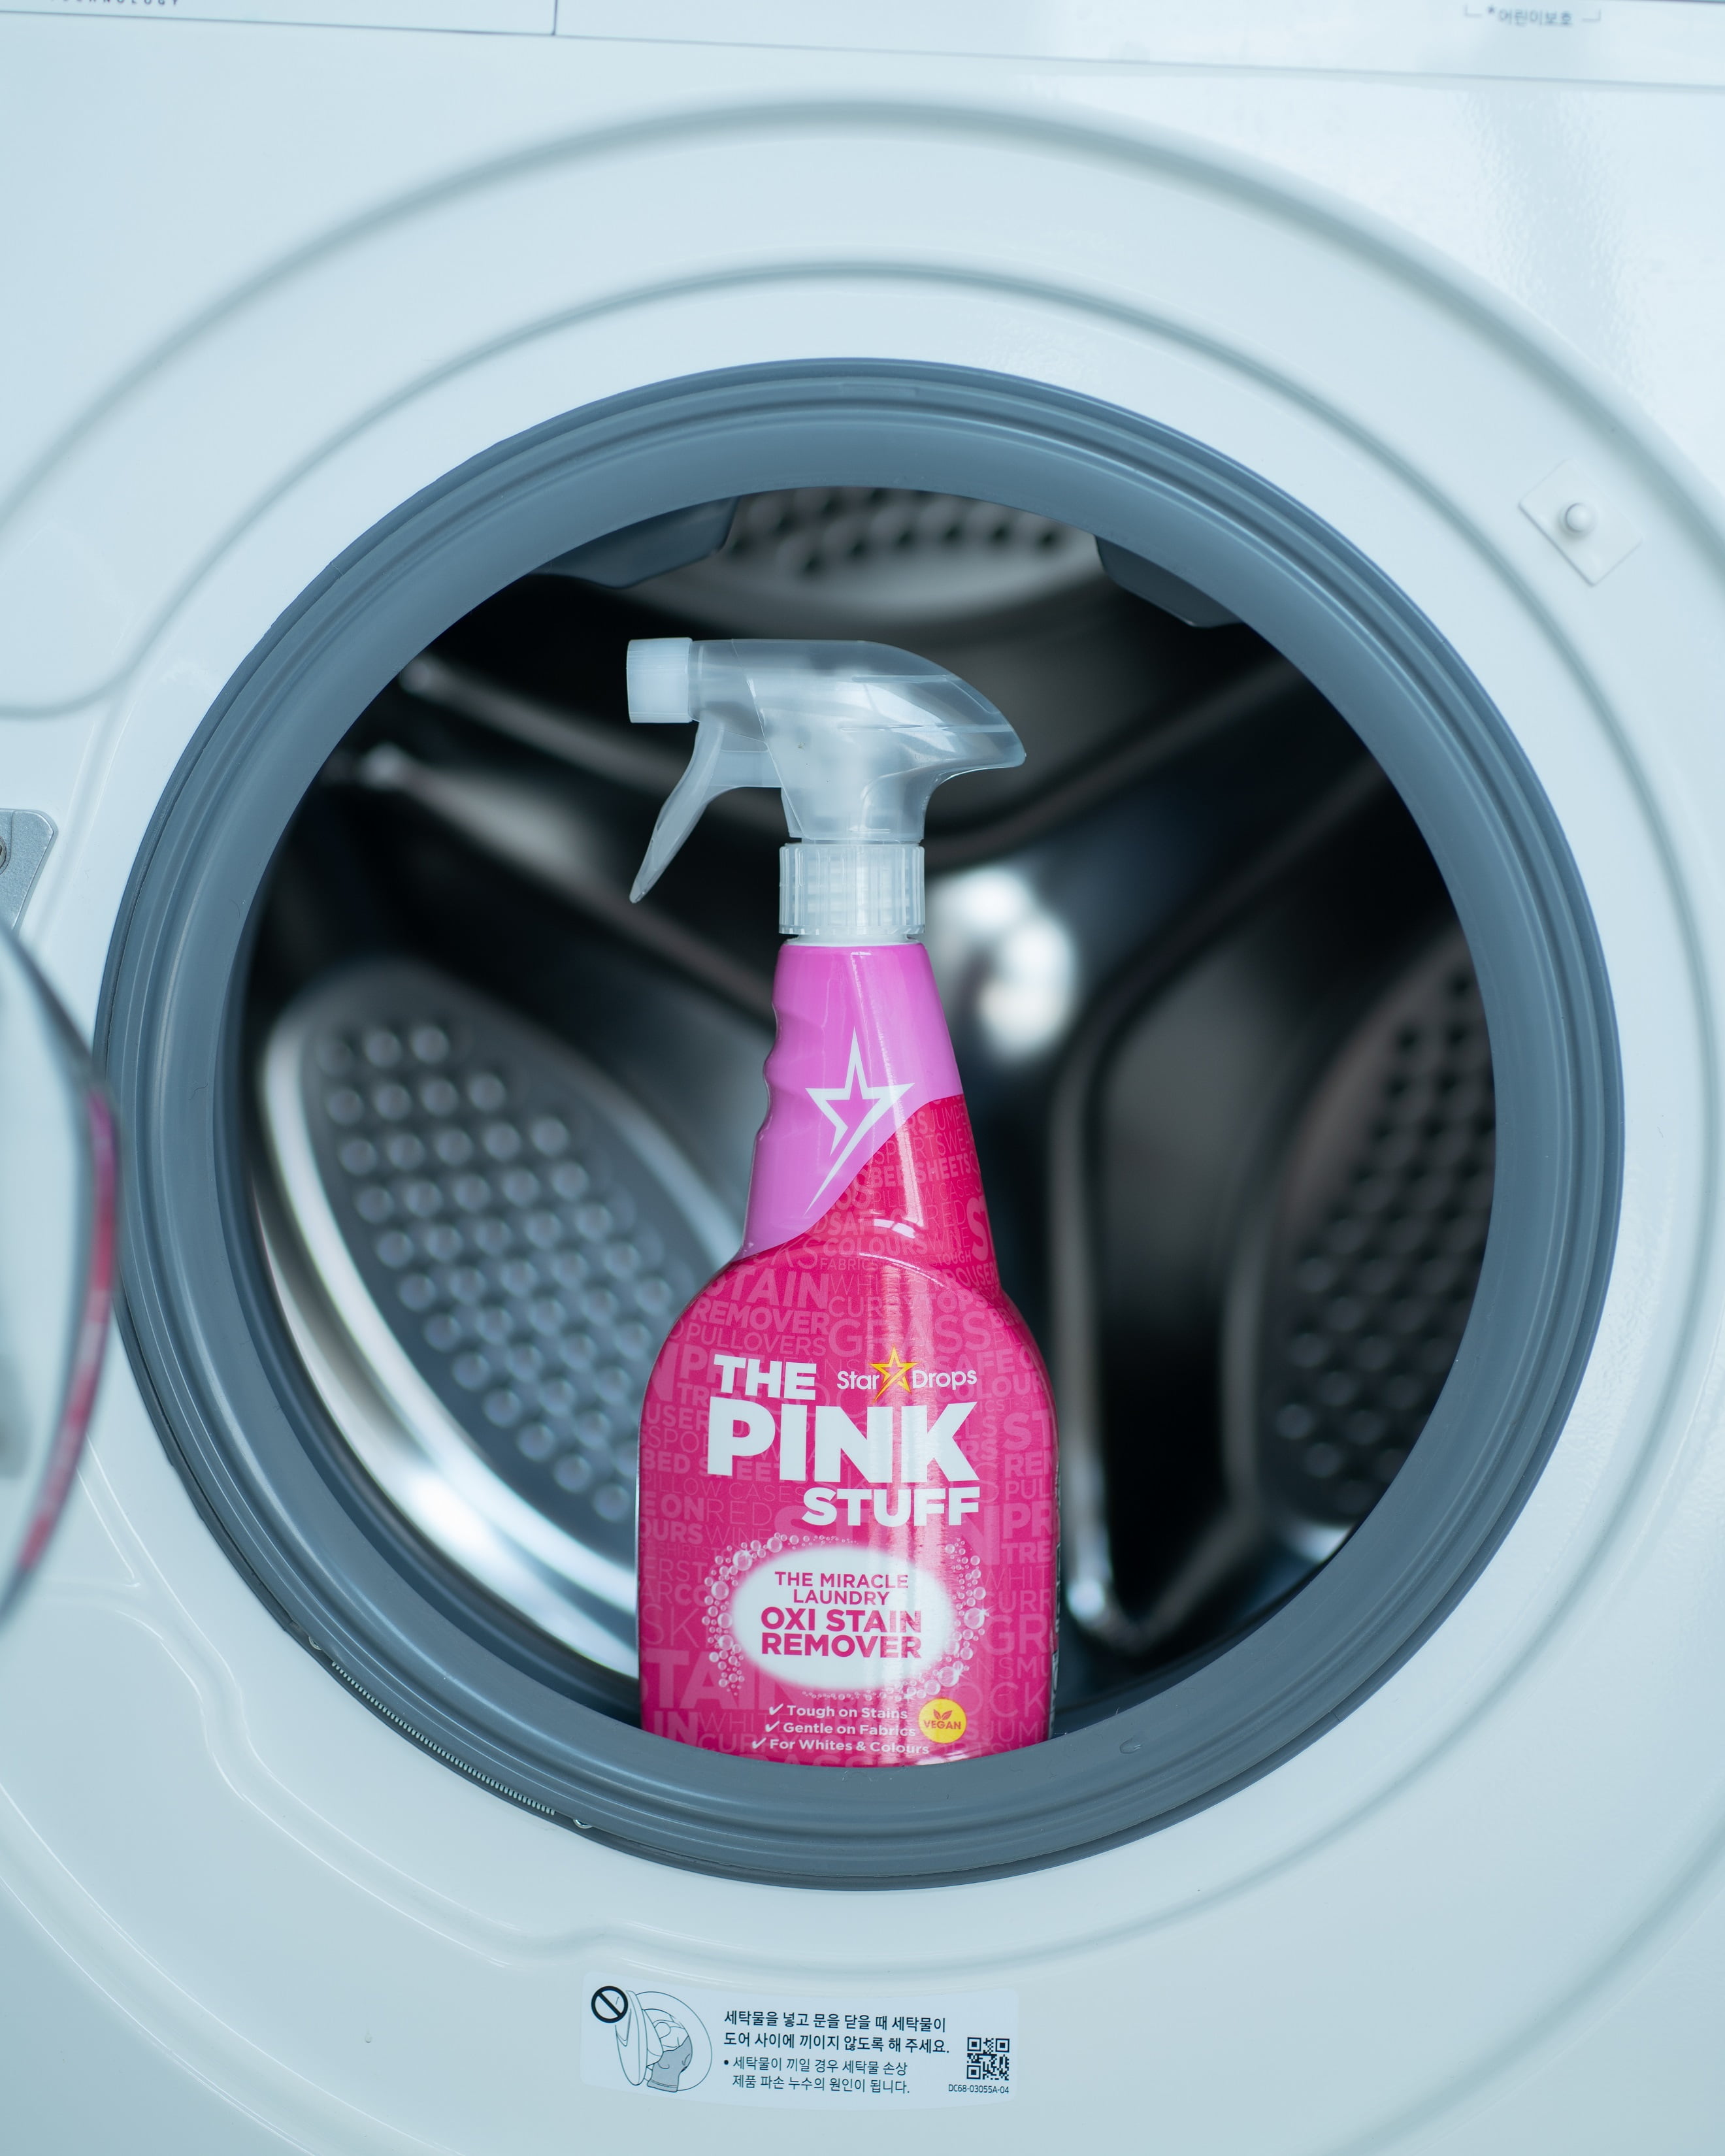 THE PINK STUFF - The Miracle Laundry Oxi Stain Remover – The Pink Stuff